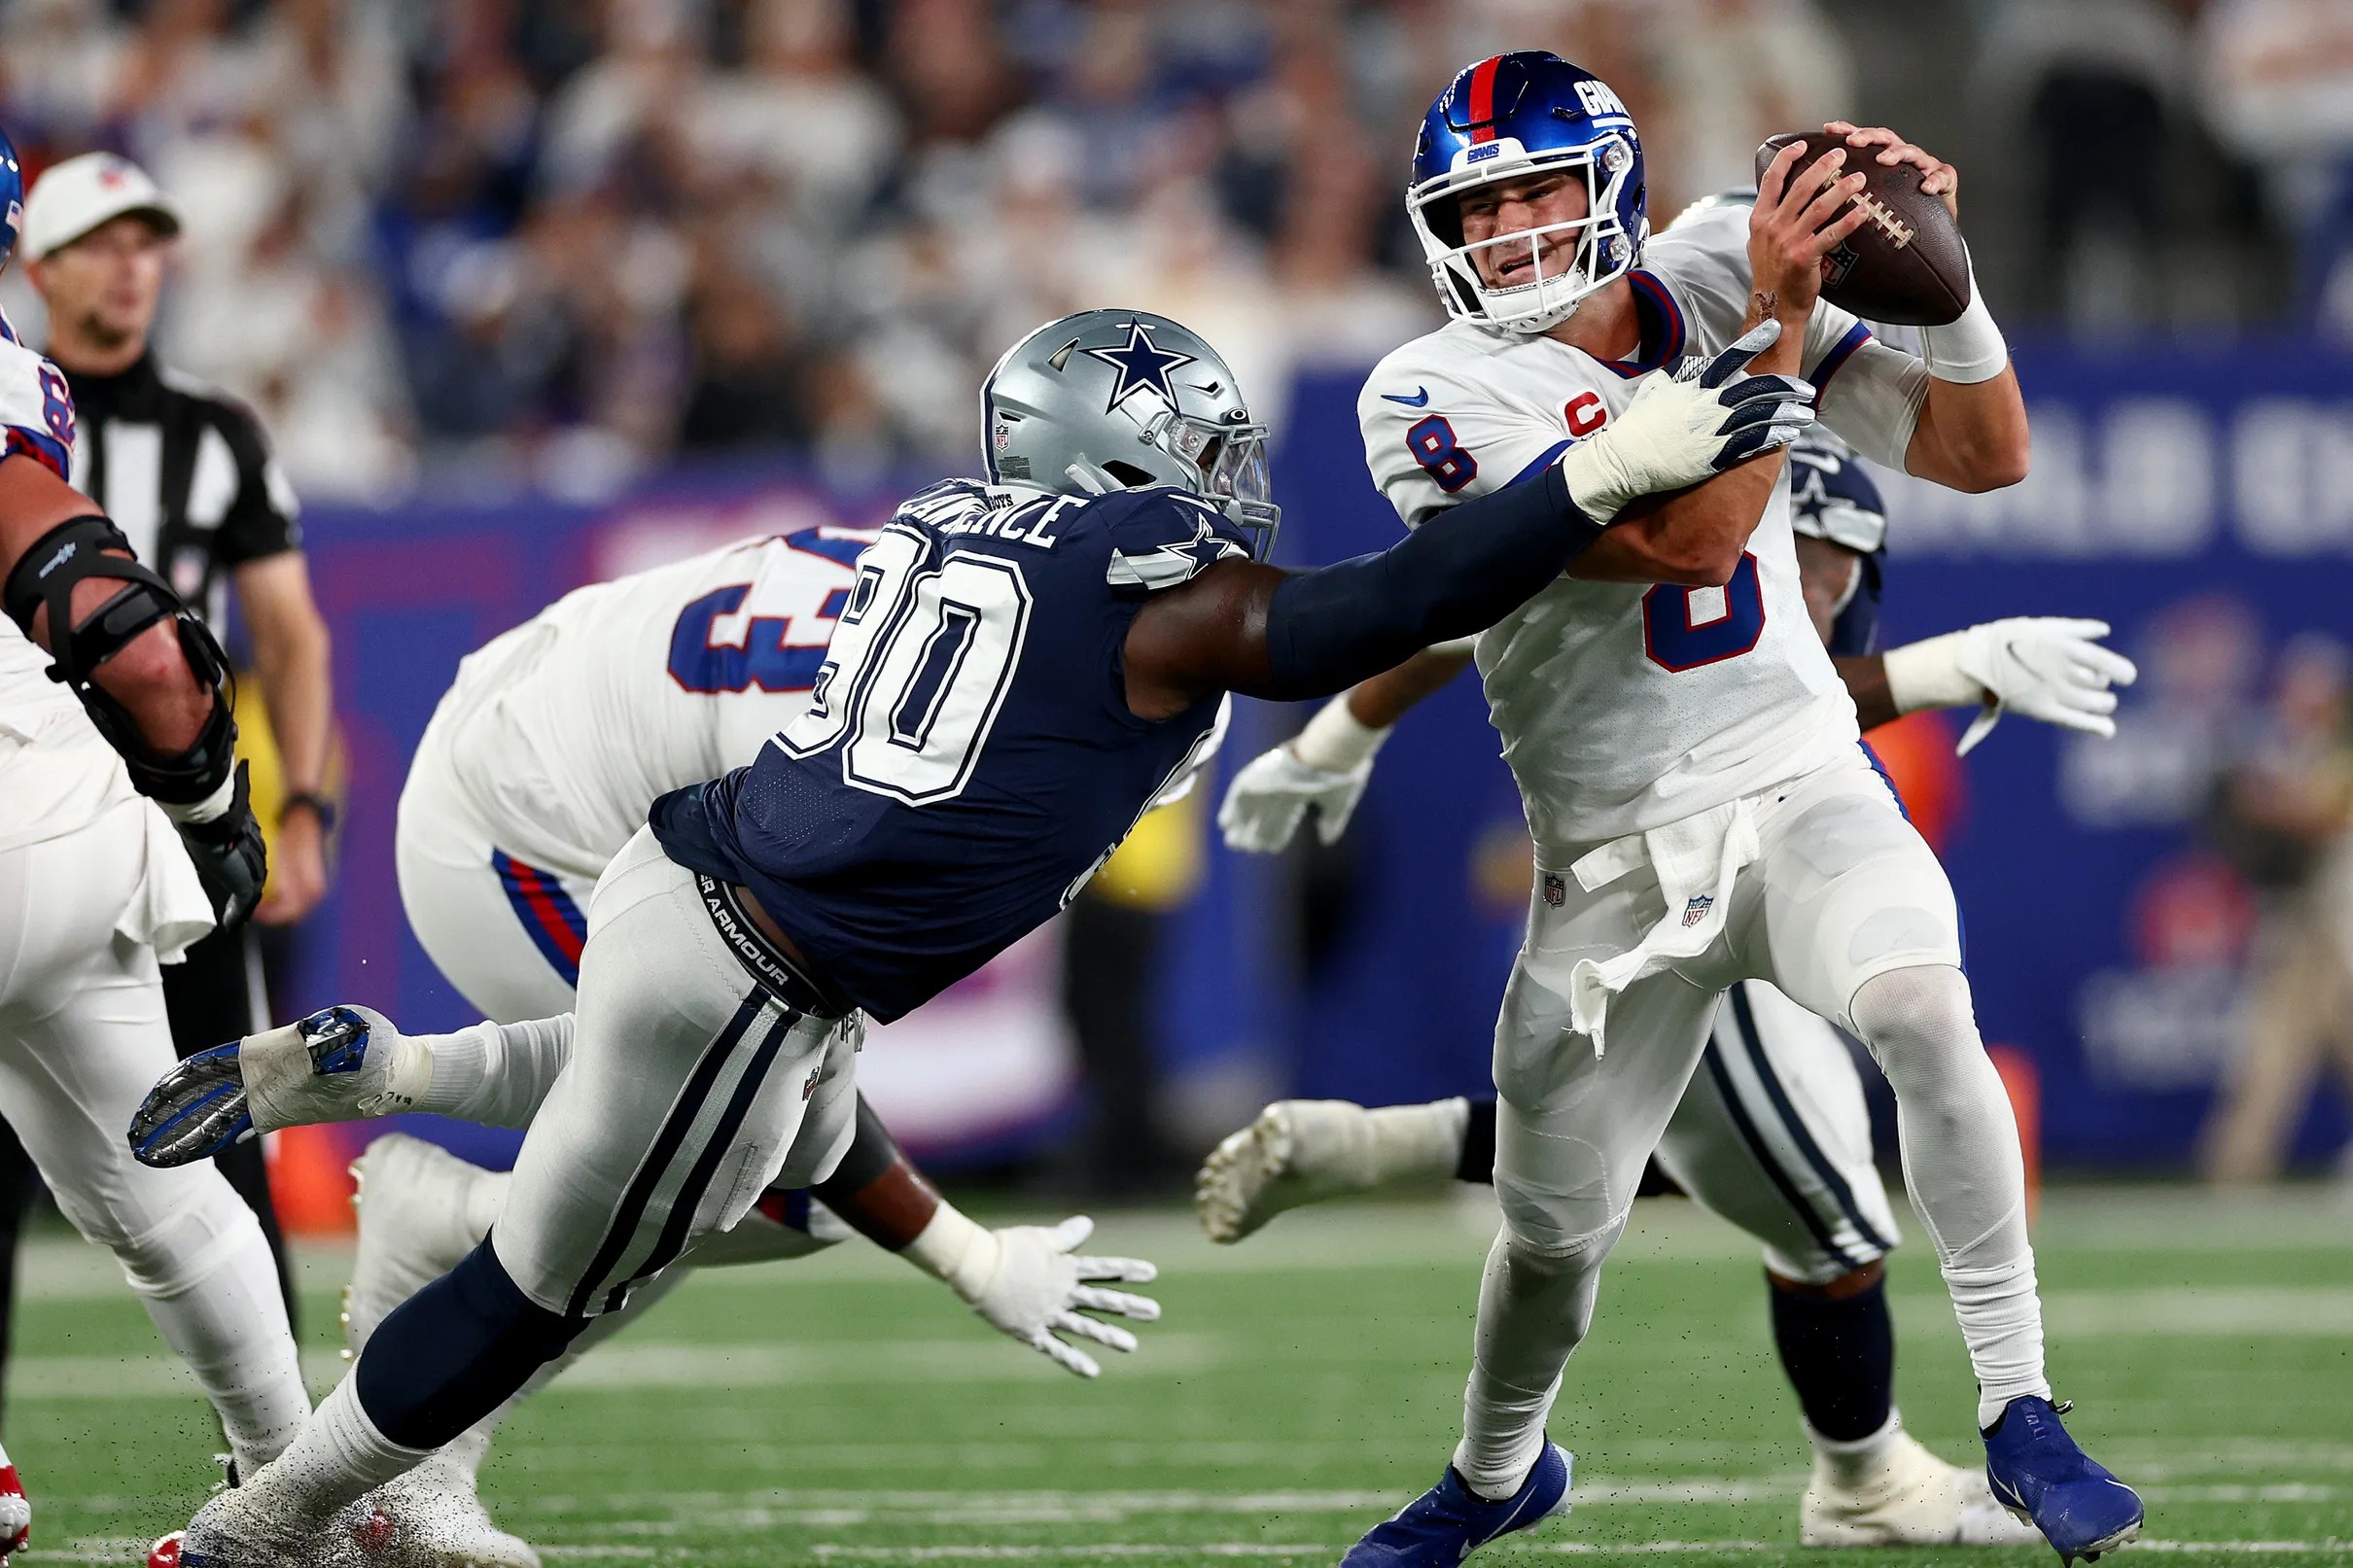 5 plays that shaped the Cowboys’ primetime win over the Giants